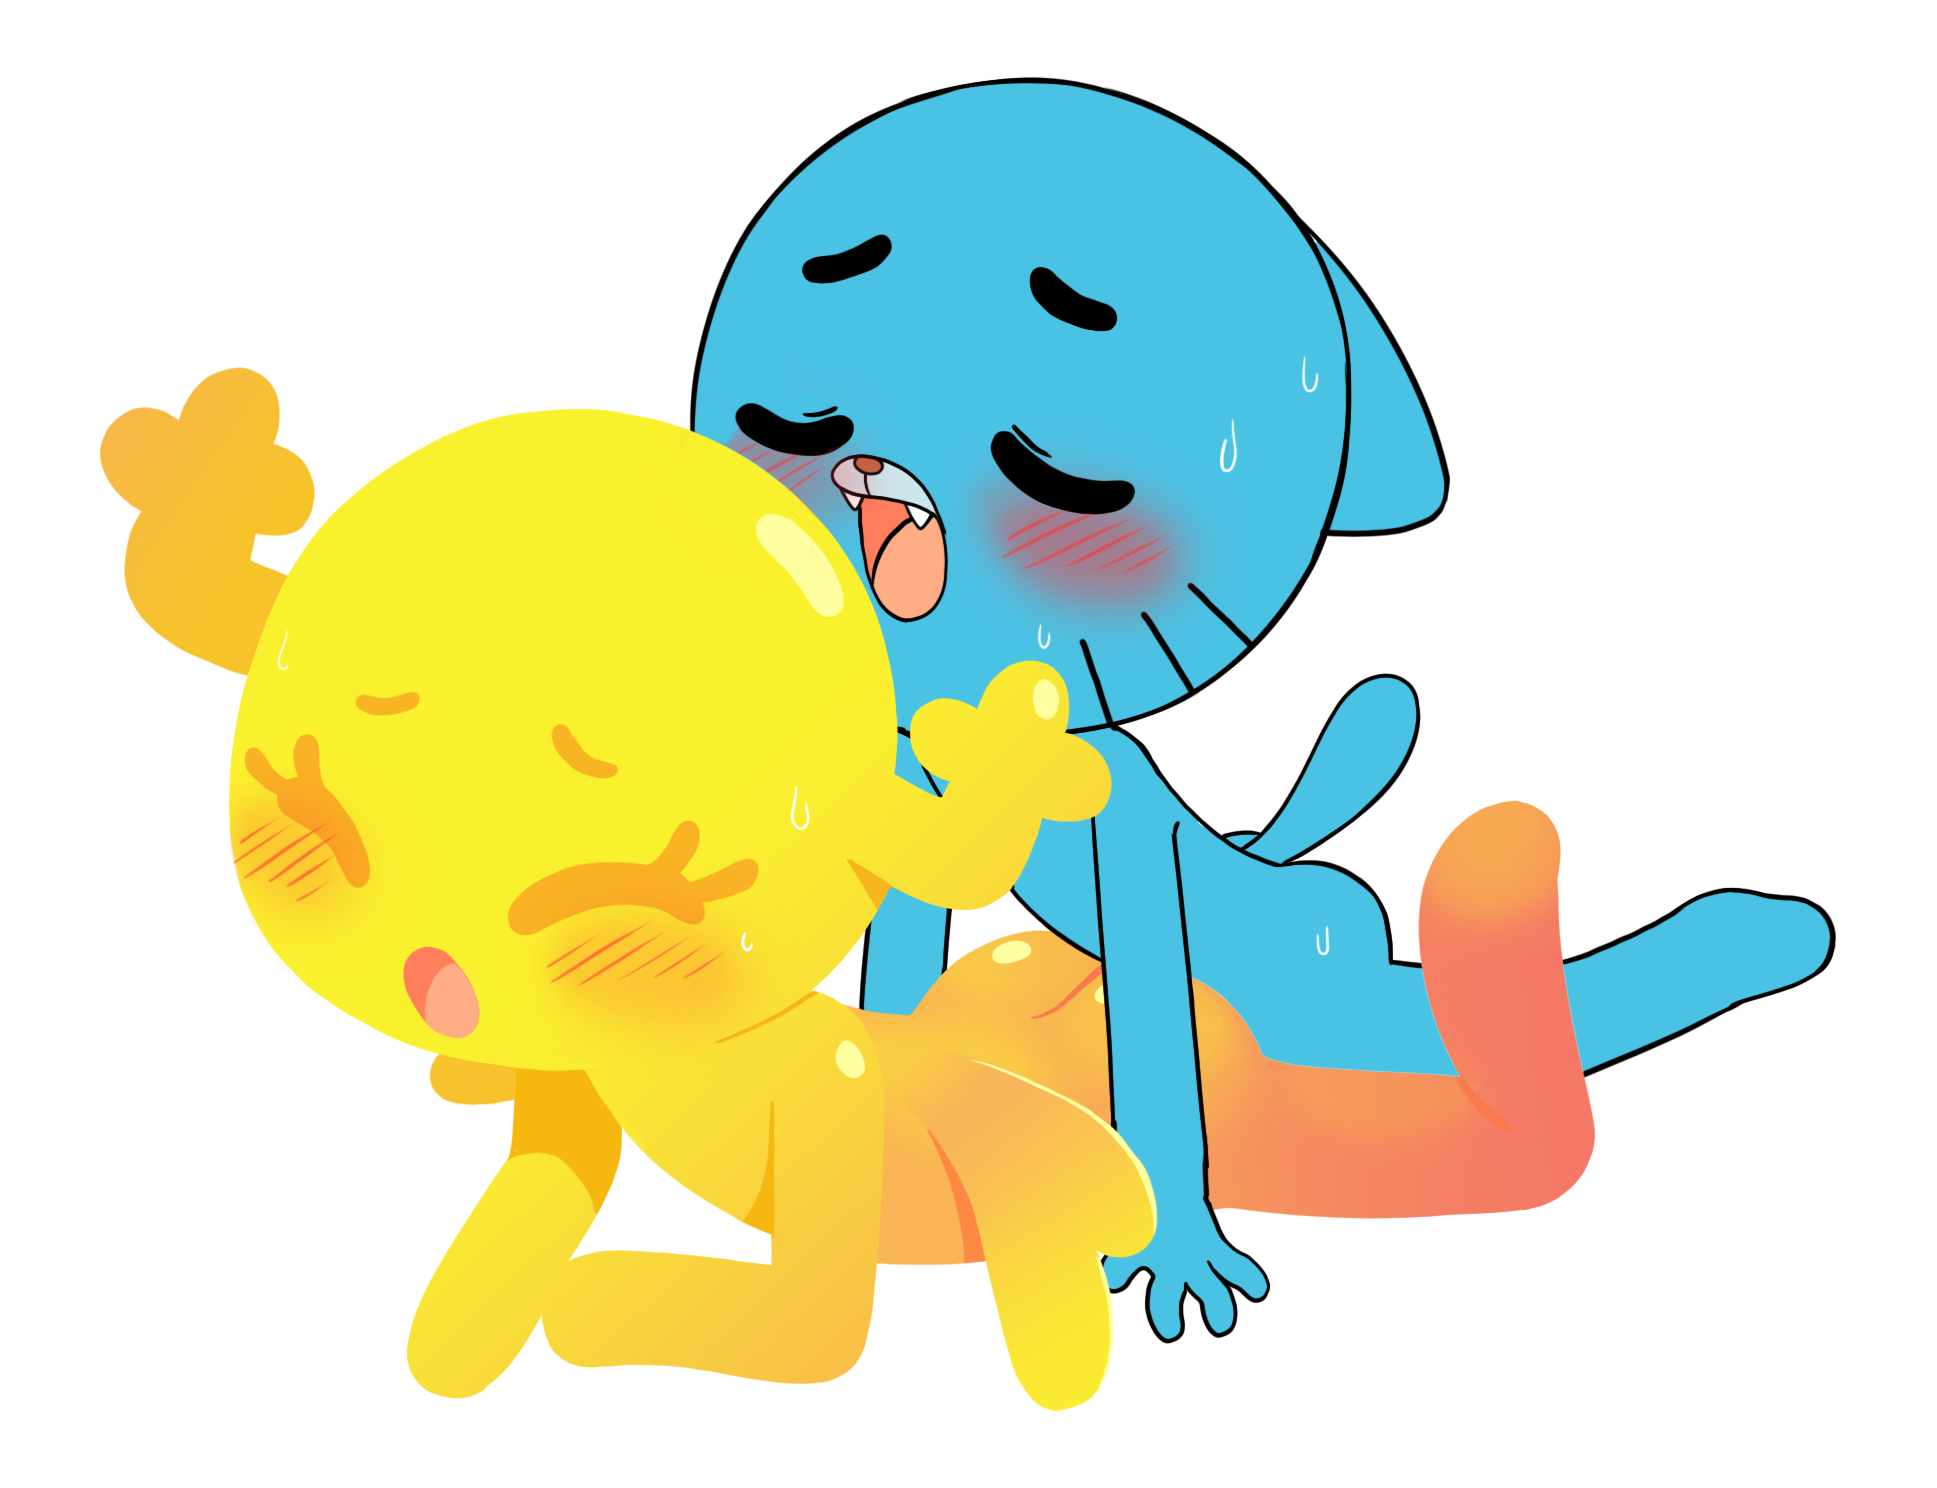 Gumball x penny